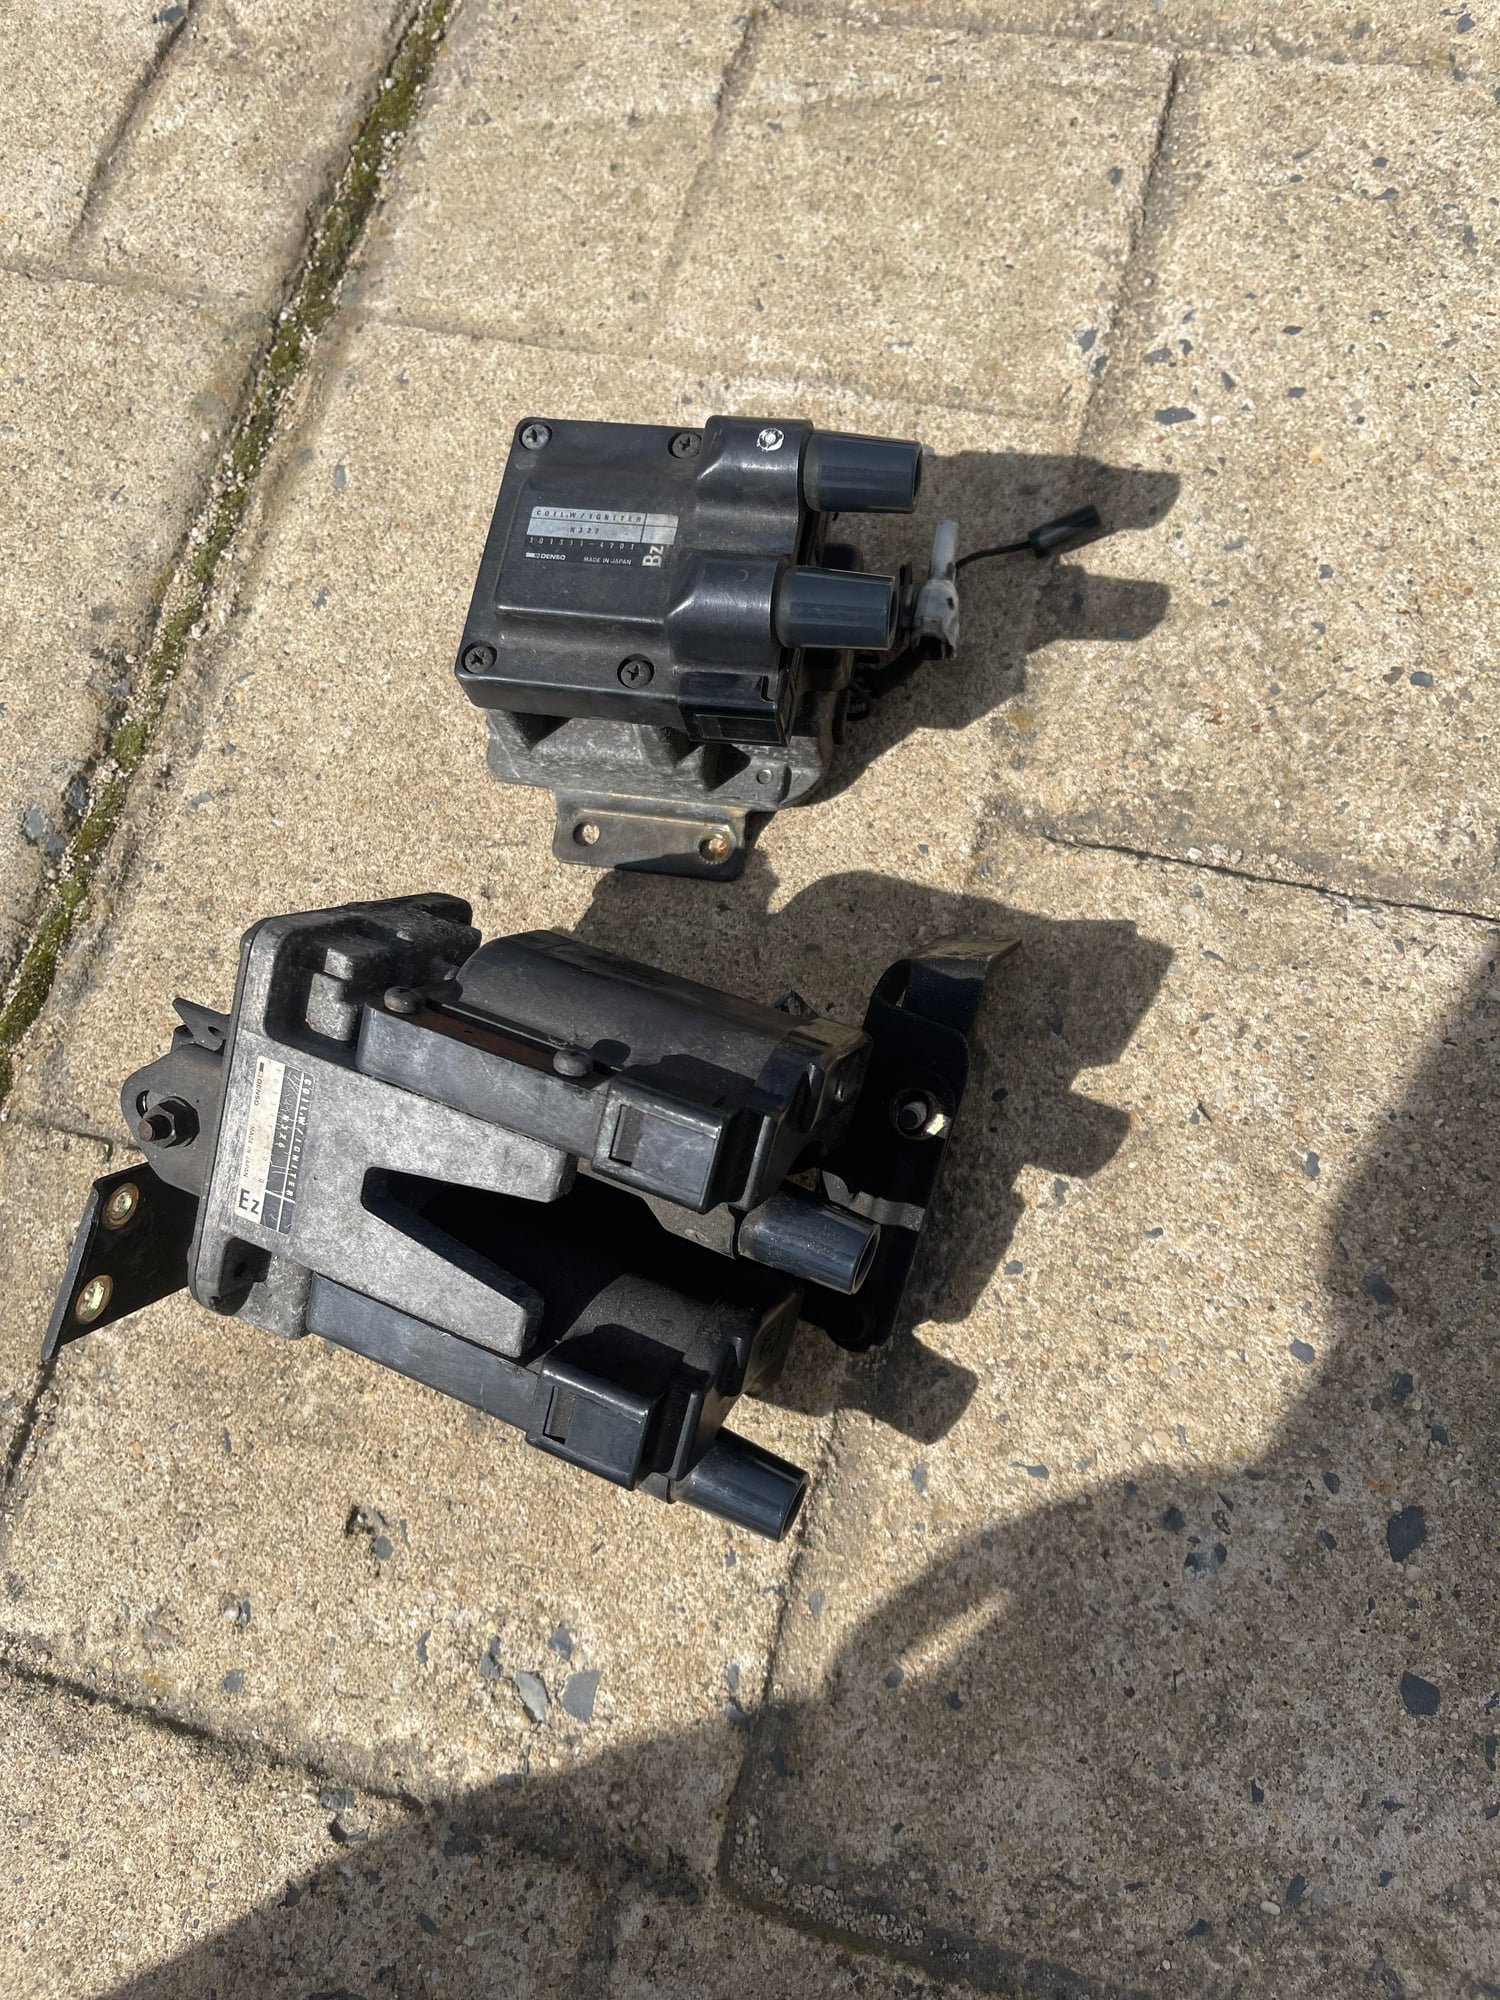 Miscellaneous - FC3S misc Parts for sale - Used - 0  All Models - Oceanside, NY 11572, United States